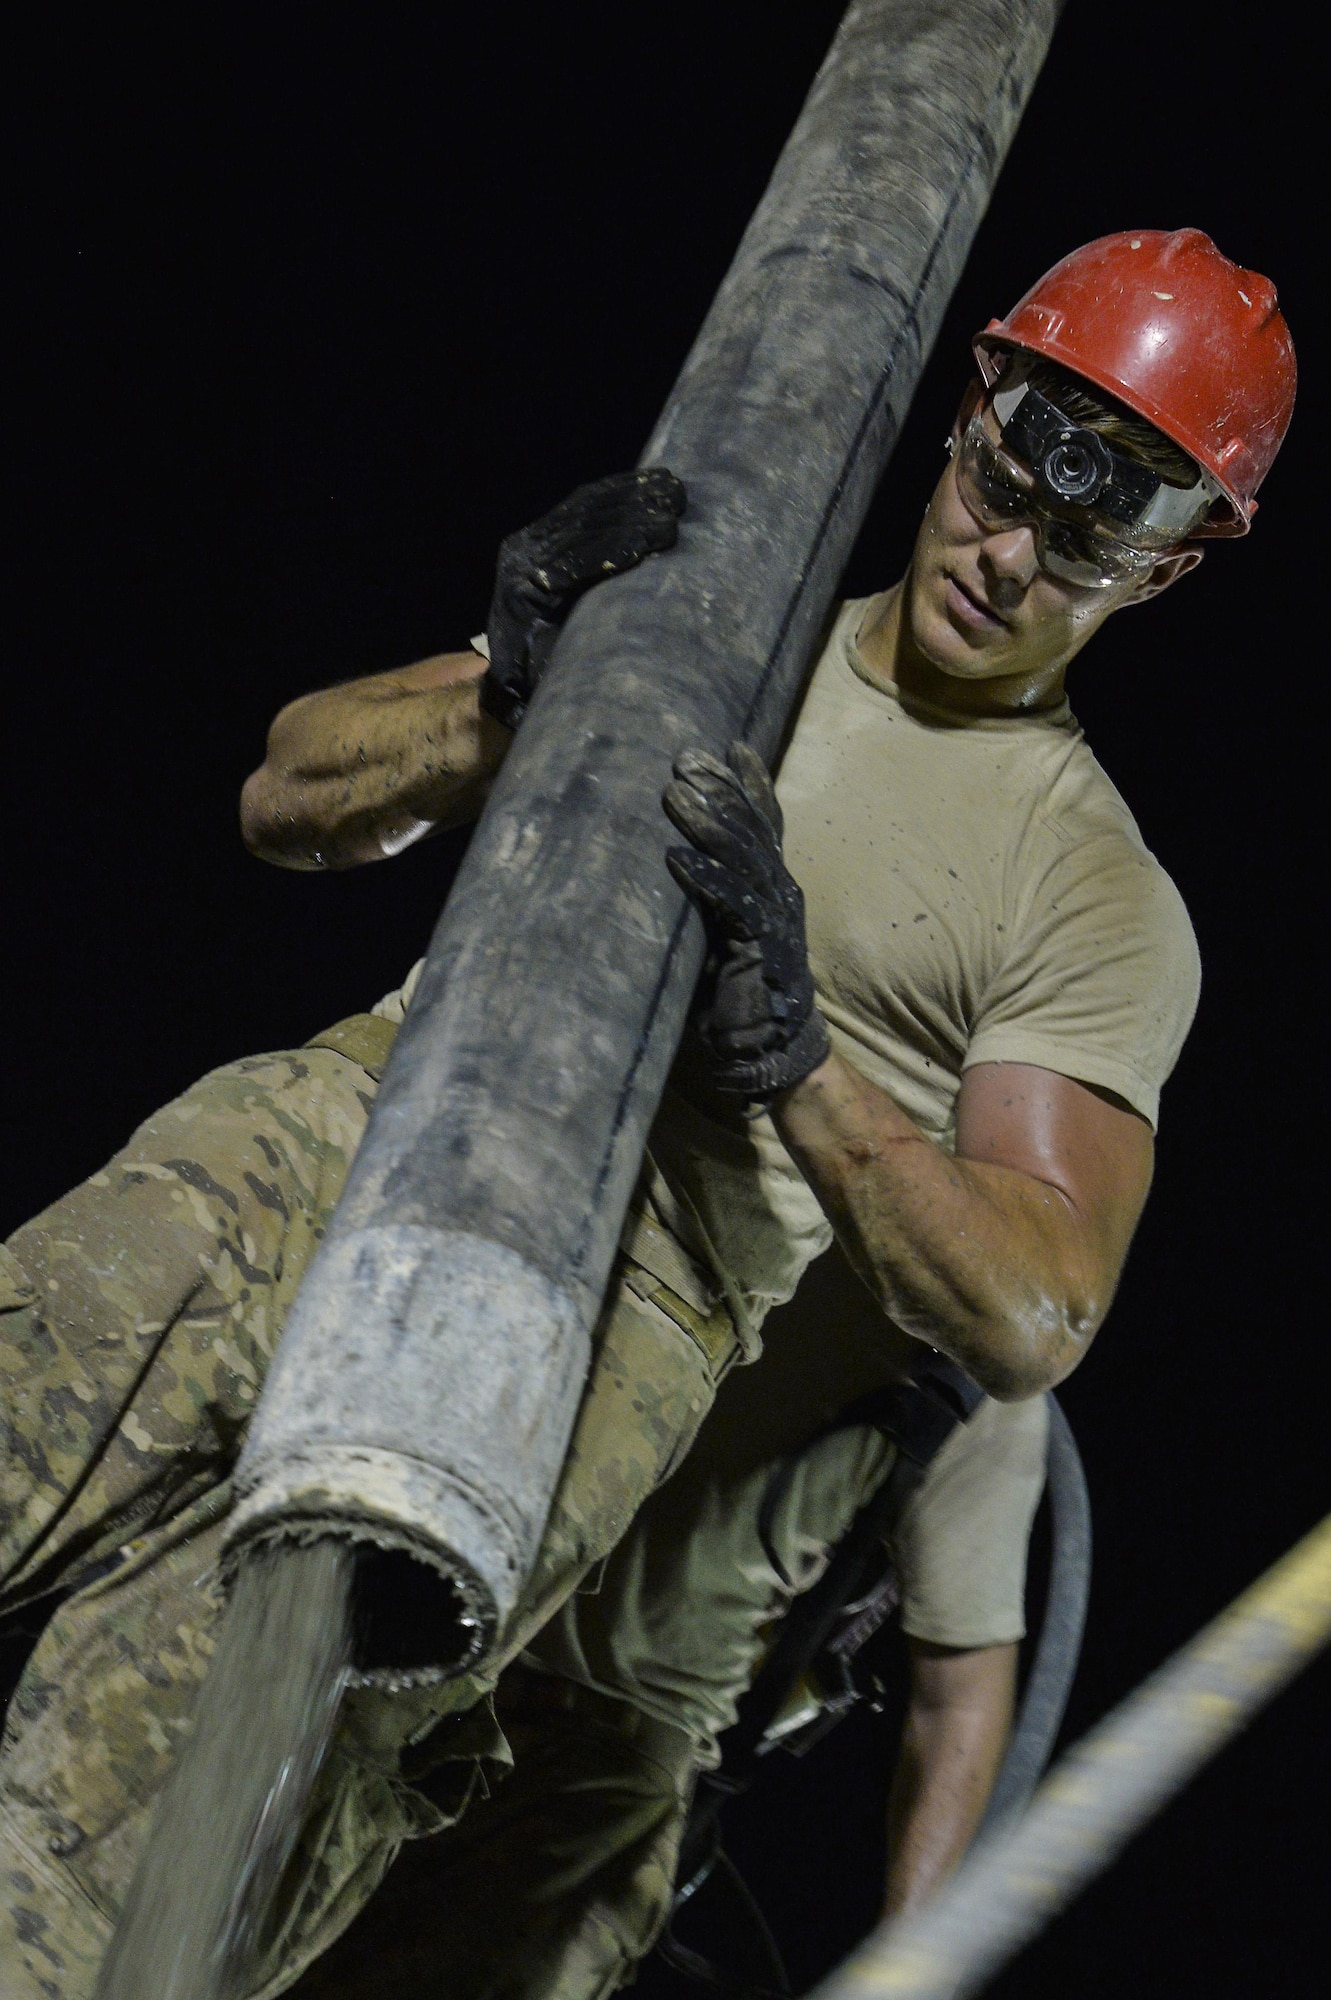 Senior Airman Anthony pours a concrete roof on a structure at an undisclosed location in Southwest Asia July 28, 2015. Airman Anthony is a structural apprentice assigned to the 557th Expeditionary RED HORSE Squadron. (U.S. Air Force photo/Tech. Sgt. Christopher Boitz)